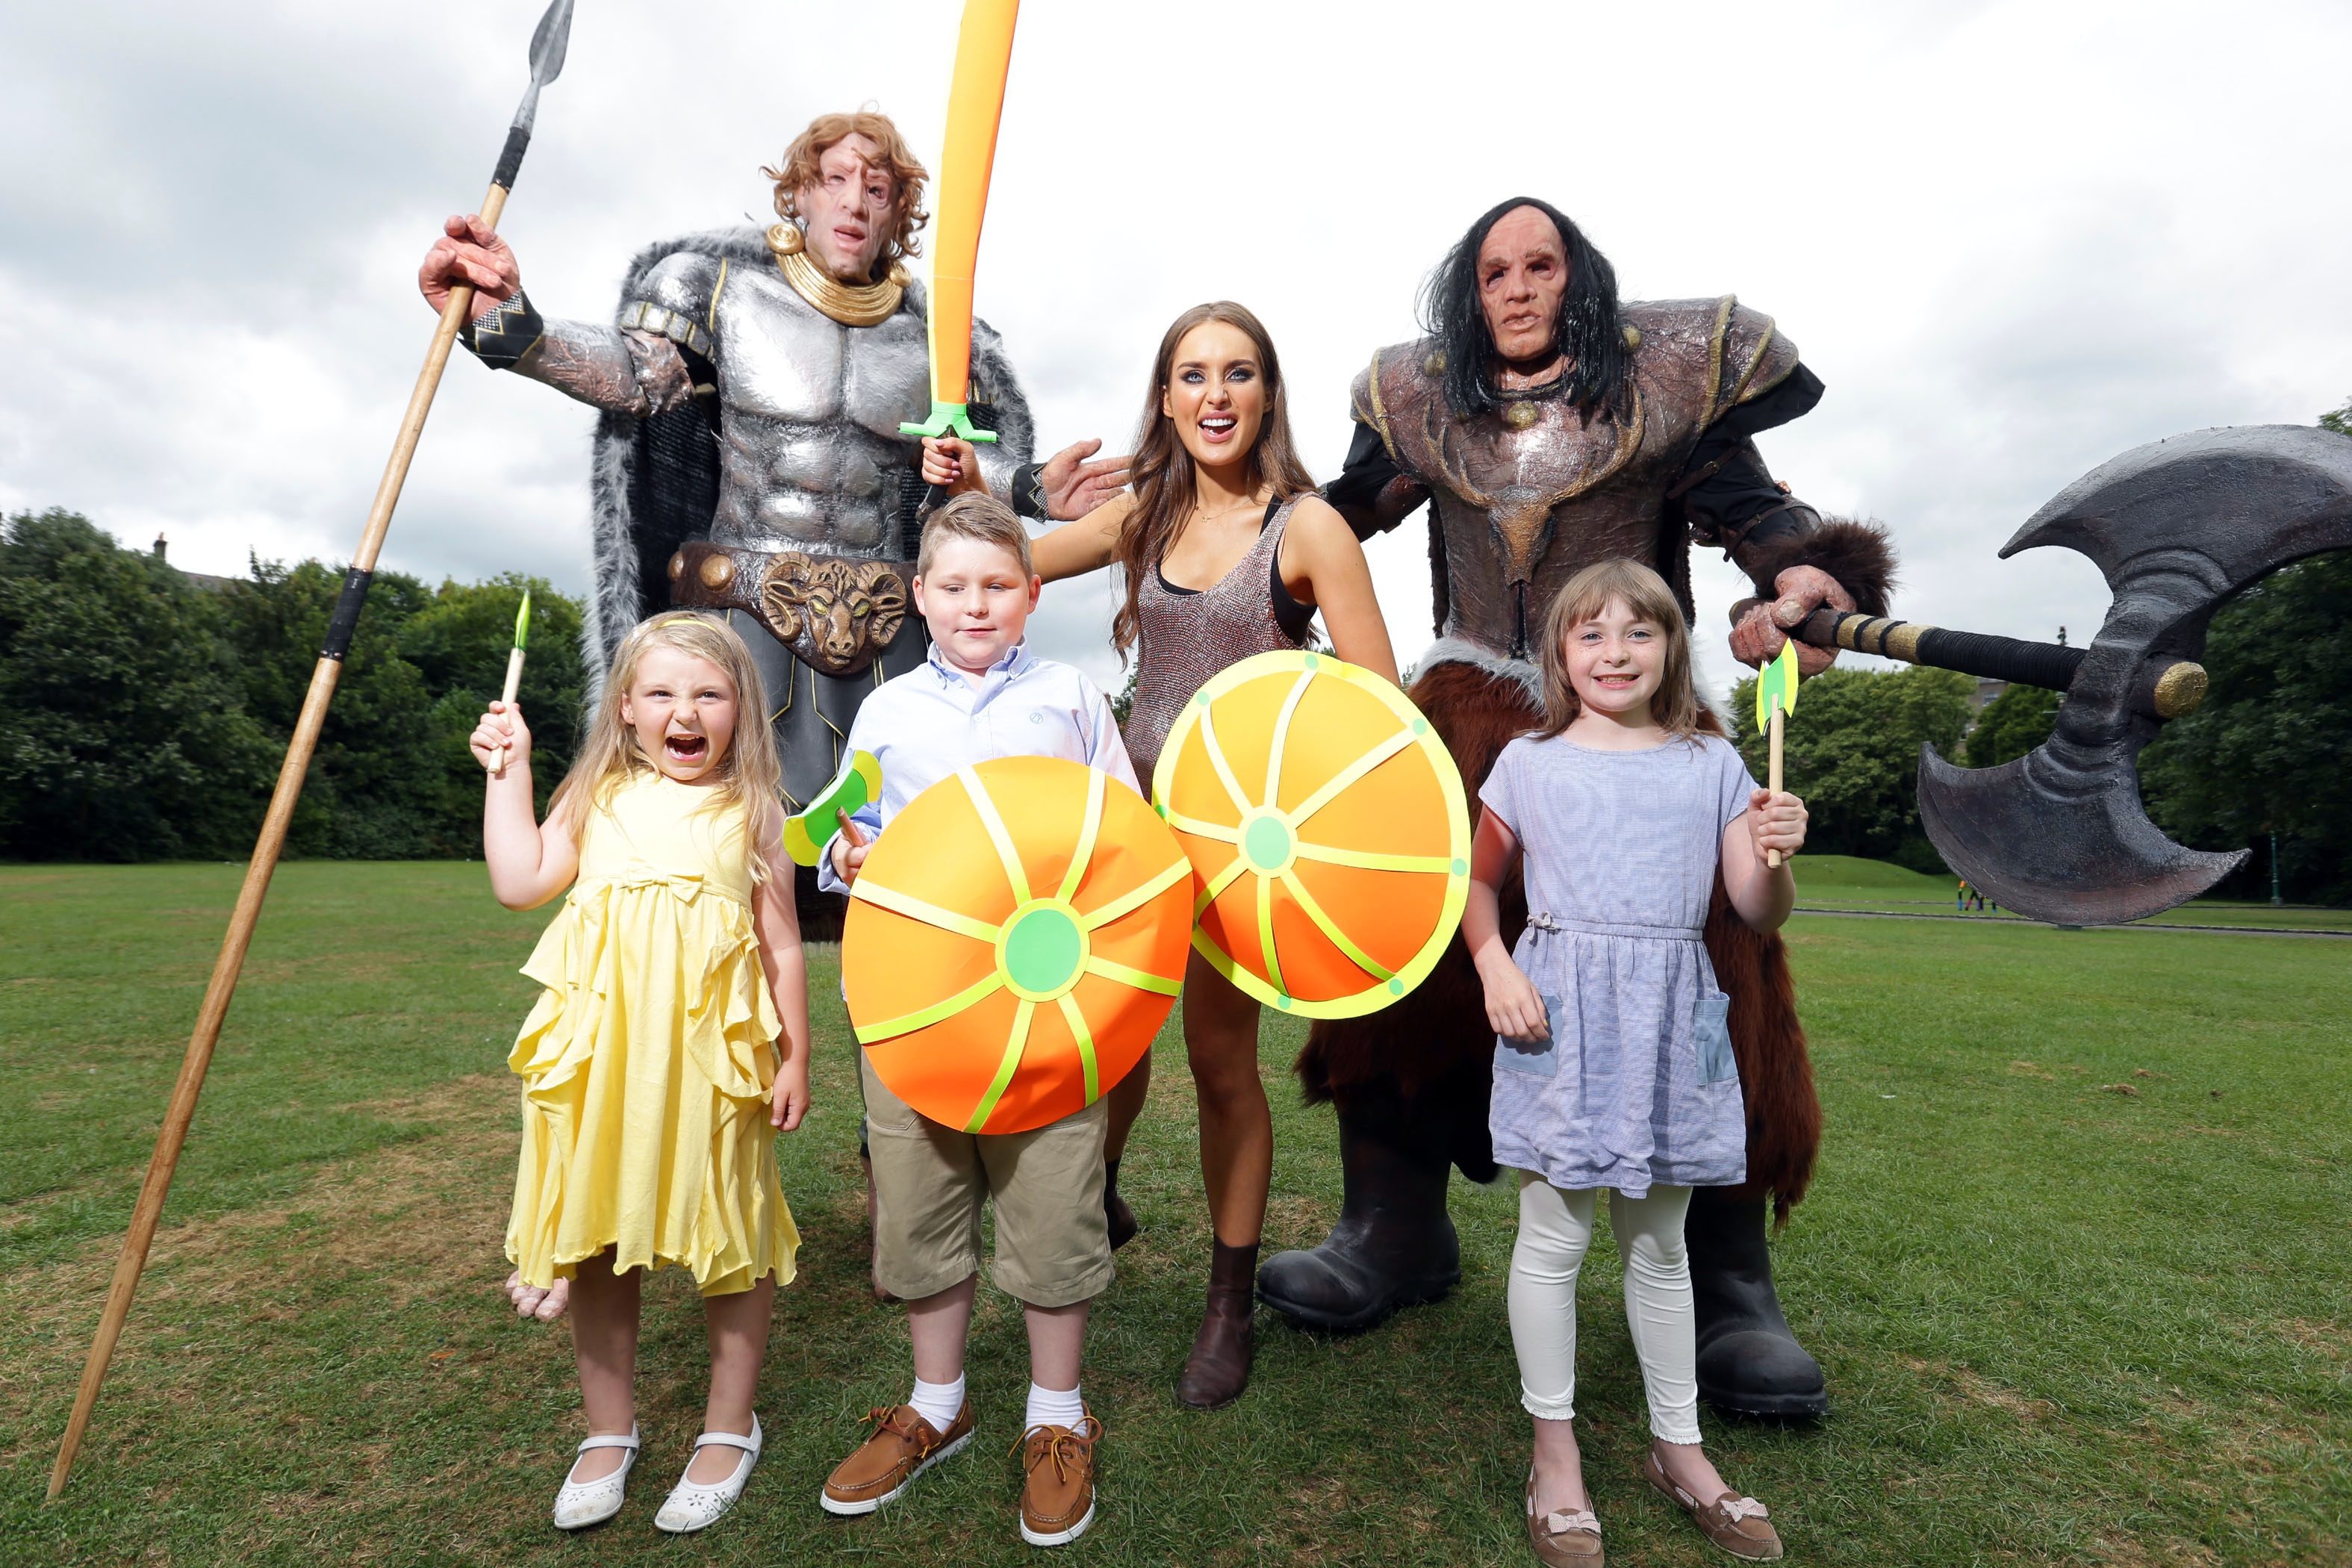 Battle of Giants Family Day Event - Sunday 24 August 2014 at Lough Boora Discovery Park in Co Offaly, Ireland